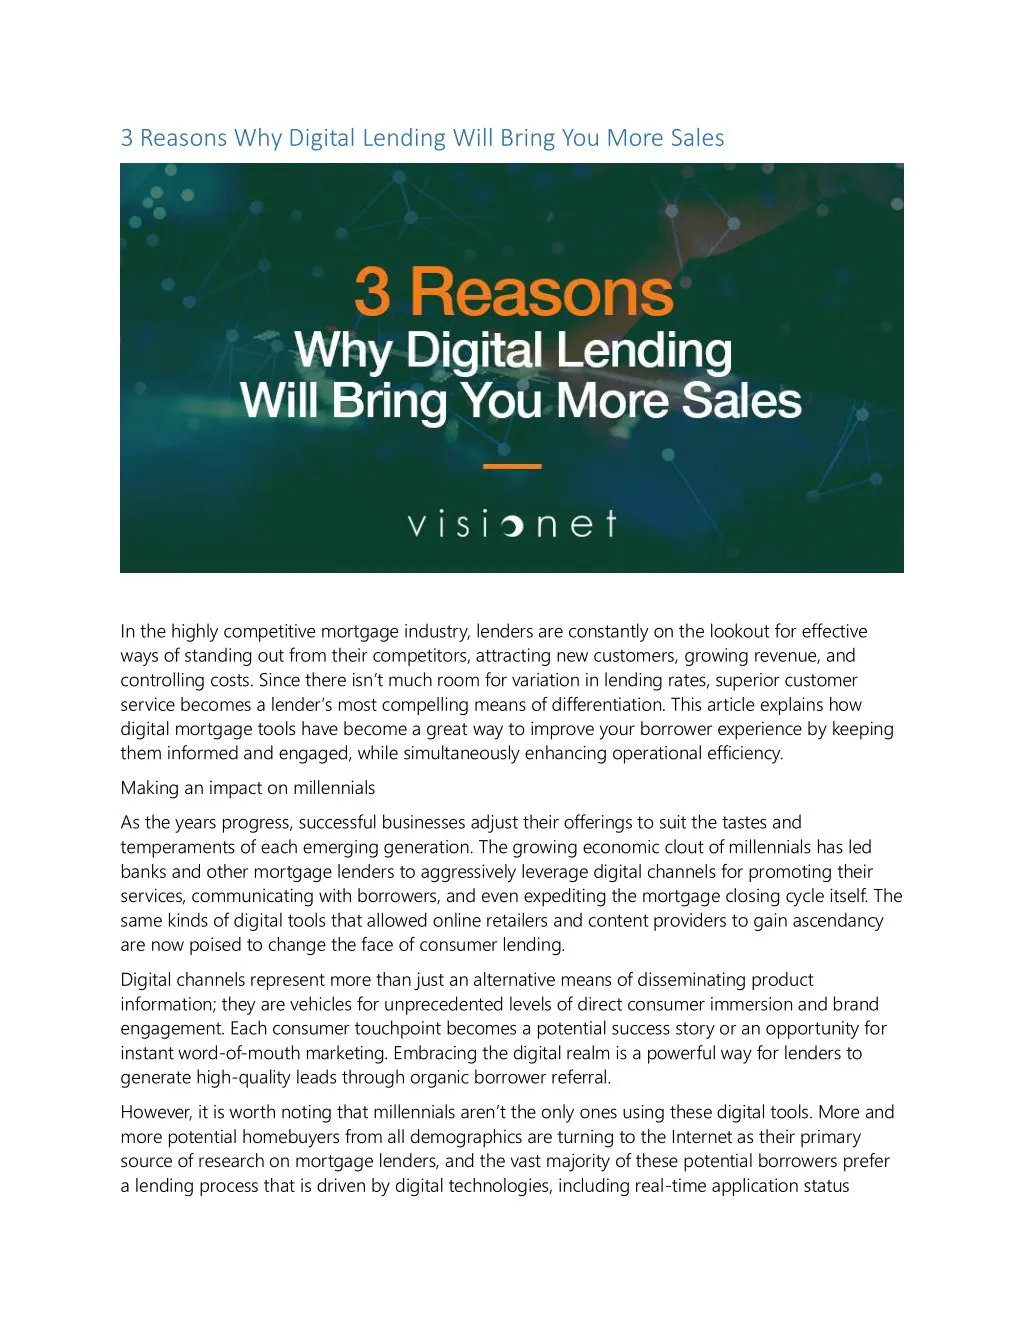 3 reasons why digital lending will bring you more